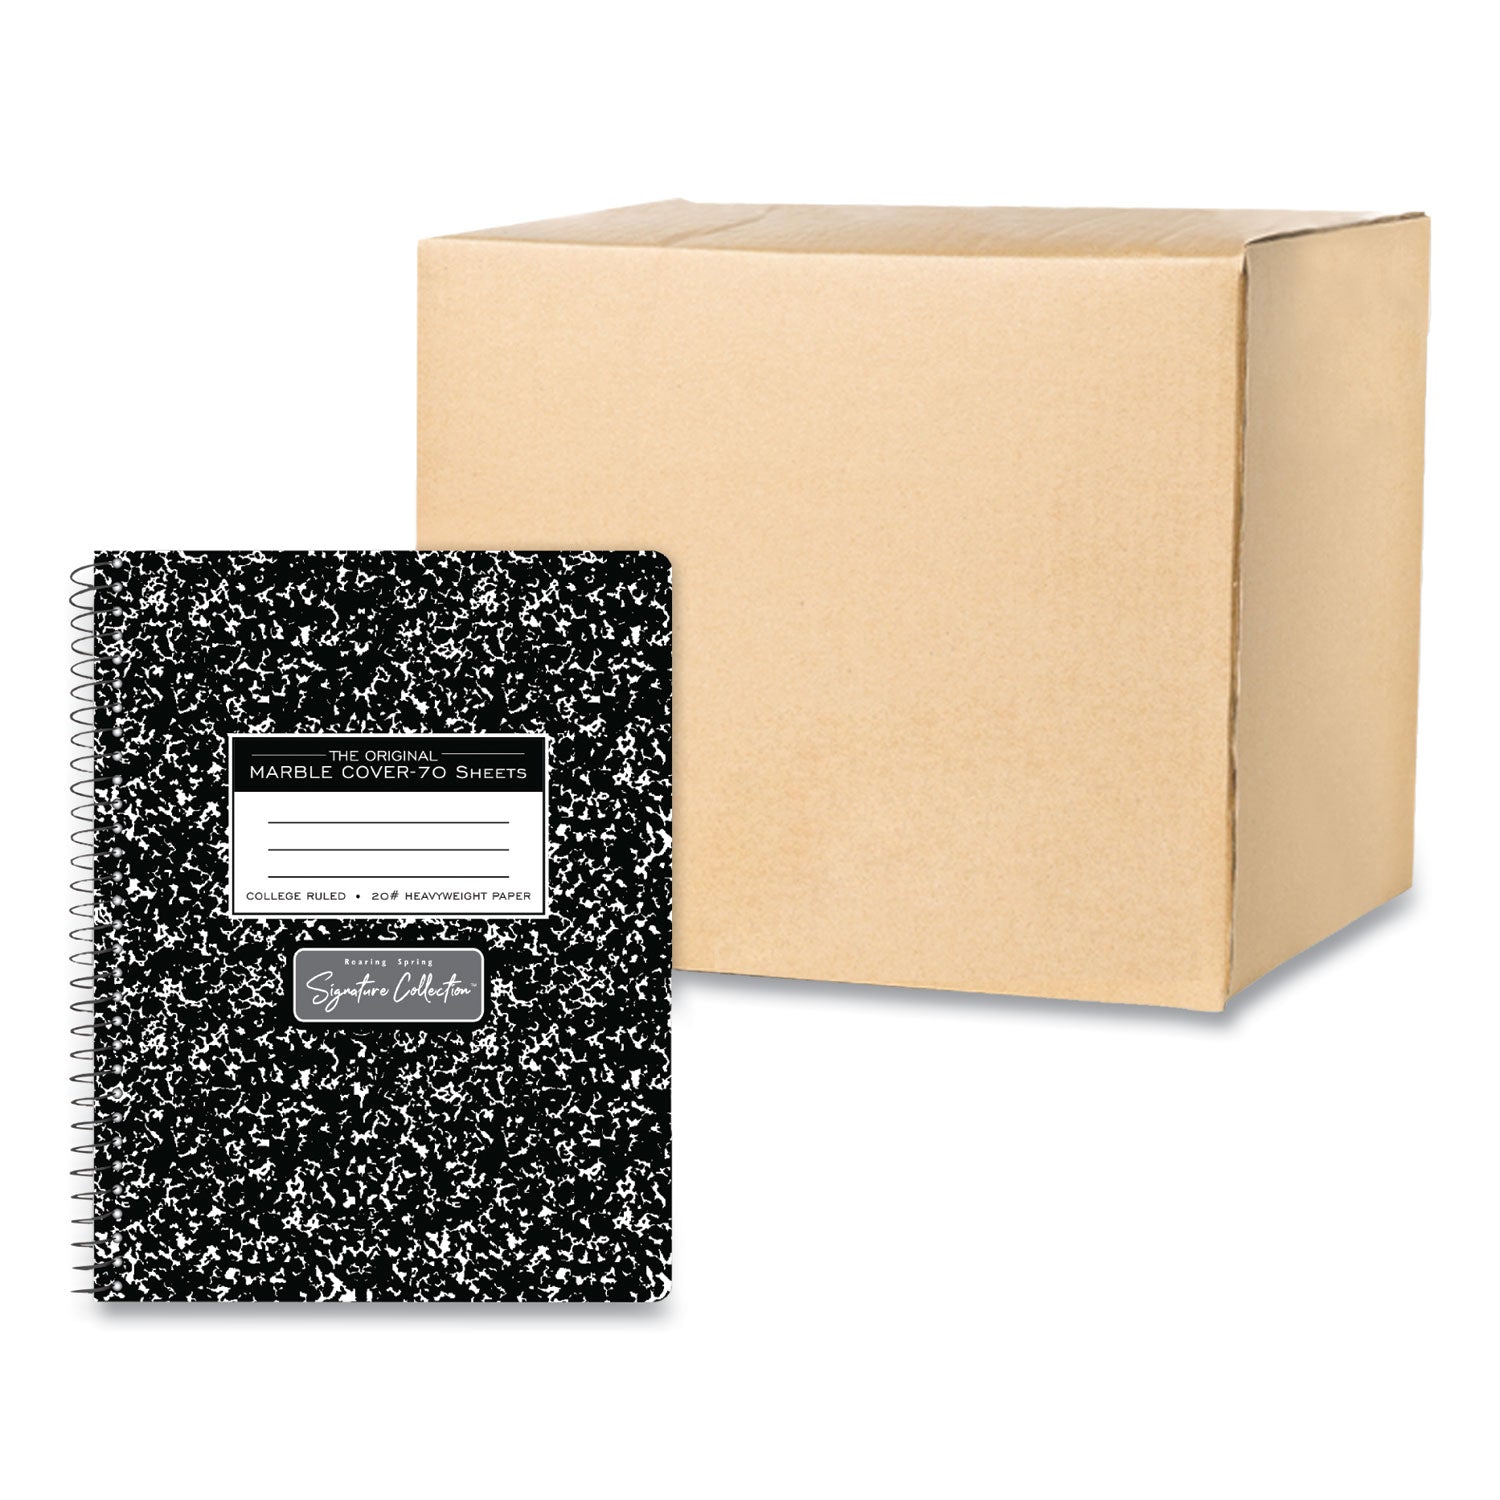 spring-signature-composition-book-med-college-rule-black-marble-cover-70-975-x-75-sheet-24-ct-ships-in-4-6-bus-days_roa10111cs - 1